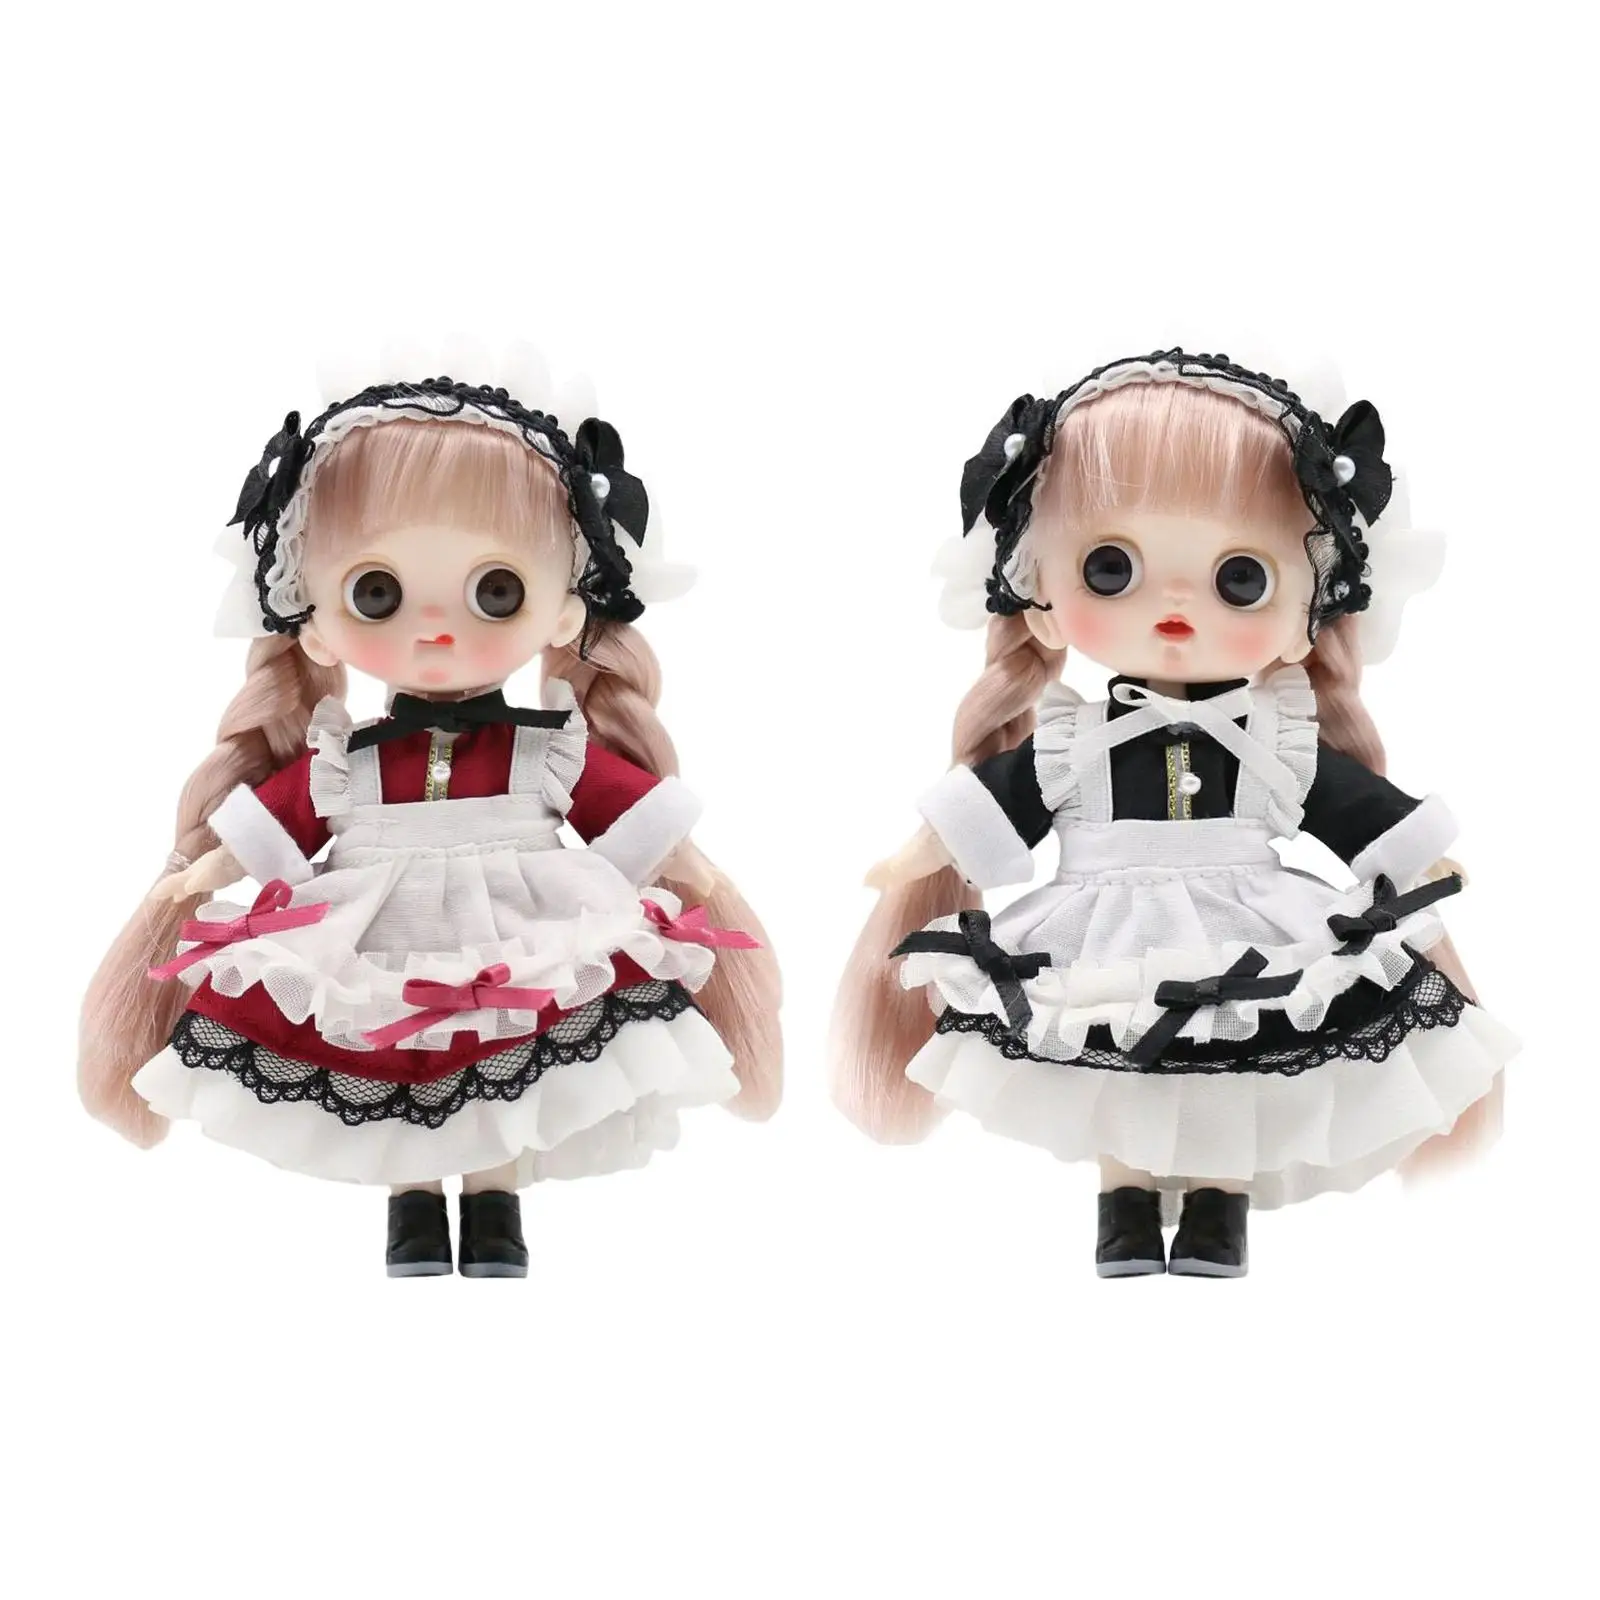 Ball Jointed Baby Doll Bendable Little Doll Fashion Dress DIY Toy Dress up Accessories Makeup Doll for Graduation Birthday Gifts